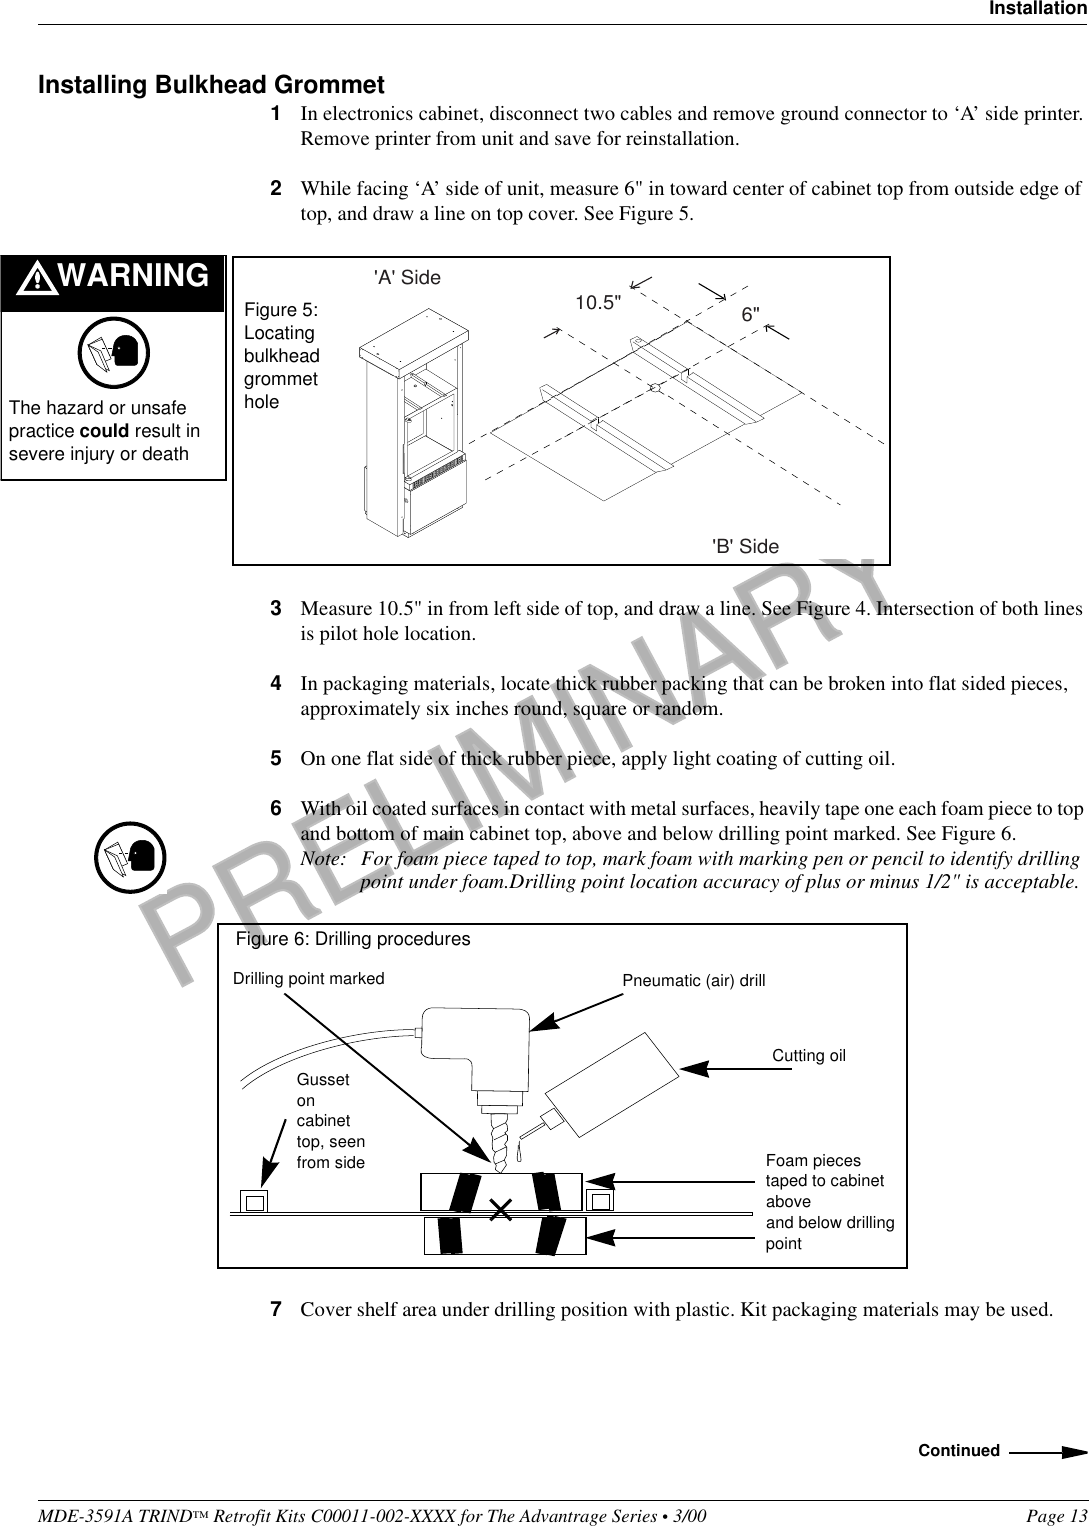 PRELIMINARYMDE-3591A TRIND™ Retrofit Kits C00011-002-XXXX for The Advantrage Series • 3/00  Page 13InstallationInstalling Bulkhead Grommet1In electronics cabinet, disconnect two cables and remove ground connector to ‘A’ side printer. Remove printer from unit and save for reinstallation.2While facing ‘A’ side of unit, measure 6&quot; in toward center of cabinet top from outside edge of top, and draw a line on top cover. See Figure 5.3Measure 10.5&quot; in from left side of top, and draw a line. See Figure 4. Intersection of both lines is pilot hole location.4In packaging materials, locate thick rubber packing that can be broken into flat sided pieces, approximately six inches round, square or random.5On one flat side of thick rubber piece, apply light coating of cutting oil.6With oil coated surfaces in contact with metal surfaces, heavily tape one each foam piece to top and bottom of main cabinet top, above and below drilling point marked. See Figure 6.Note: For foam piece taped to top, mark foam with marking pen or pencil to identify drilling point under foam.Drilling point location accuracy of plus or minus 1/2&quot; is acceptable. 7Cover shelf area under drilling position with plastic. Kit packaging materials may be used.6&quot;10.5&quot;&apos;B&apos; Side&apos;A&apos; SideFigure 5: Locating bulkhead grommet holeWARNINGThe hazard or unsafe practice could result in severe injury or deathCutting oilFoam pieces taped to cabinet aboveand below drilling pointPneumatic (air) drillFigure 6: Drilling proceduresGusset on cabinet top, seen from sideDrilling point markedContinued